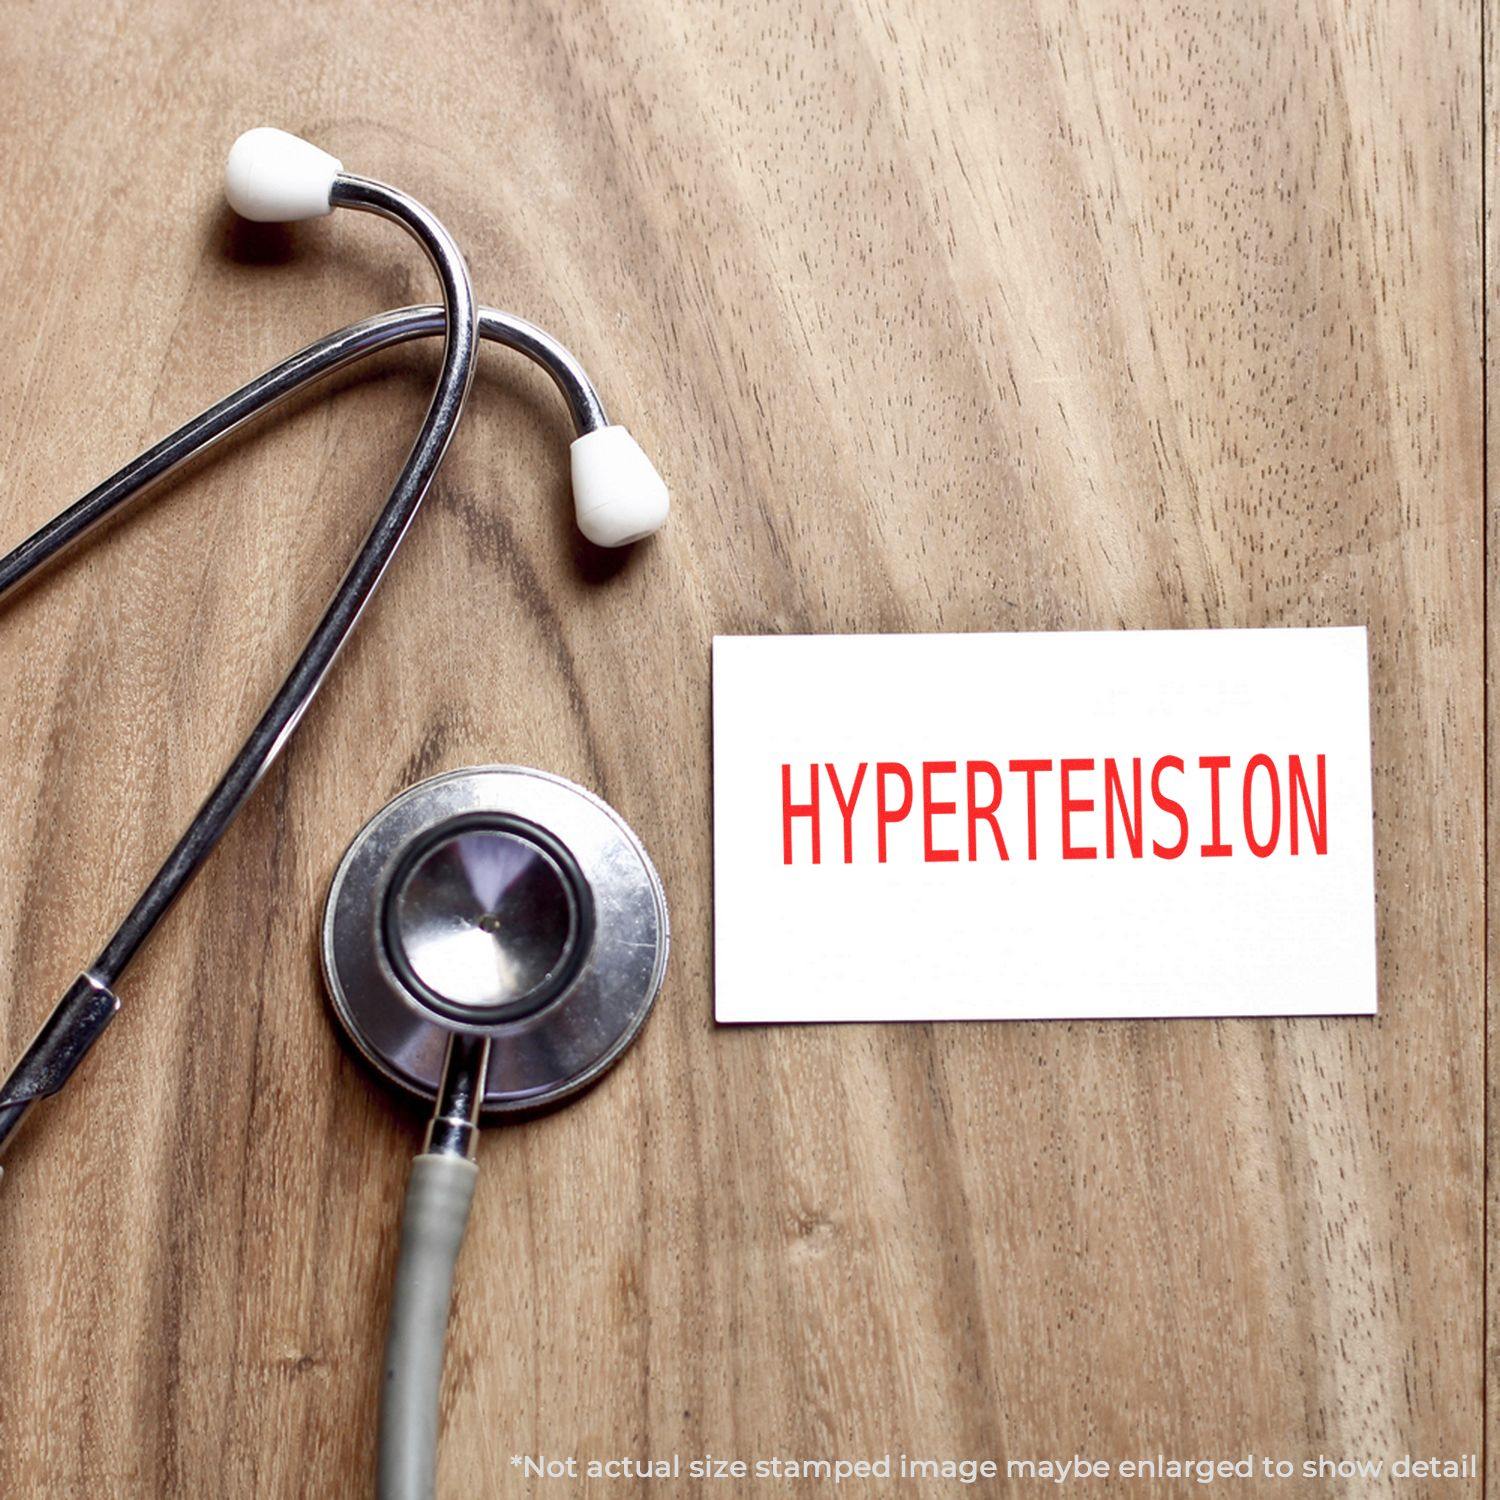 A self-inking stamp with a stamped image showing how the text "HYPERTENSION" in a large bold font is displayed by it.